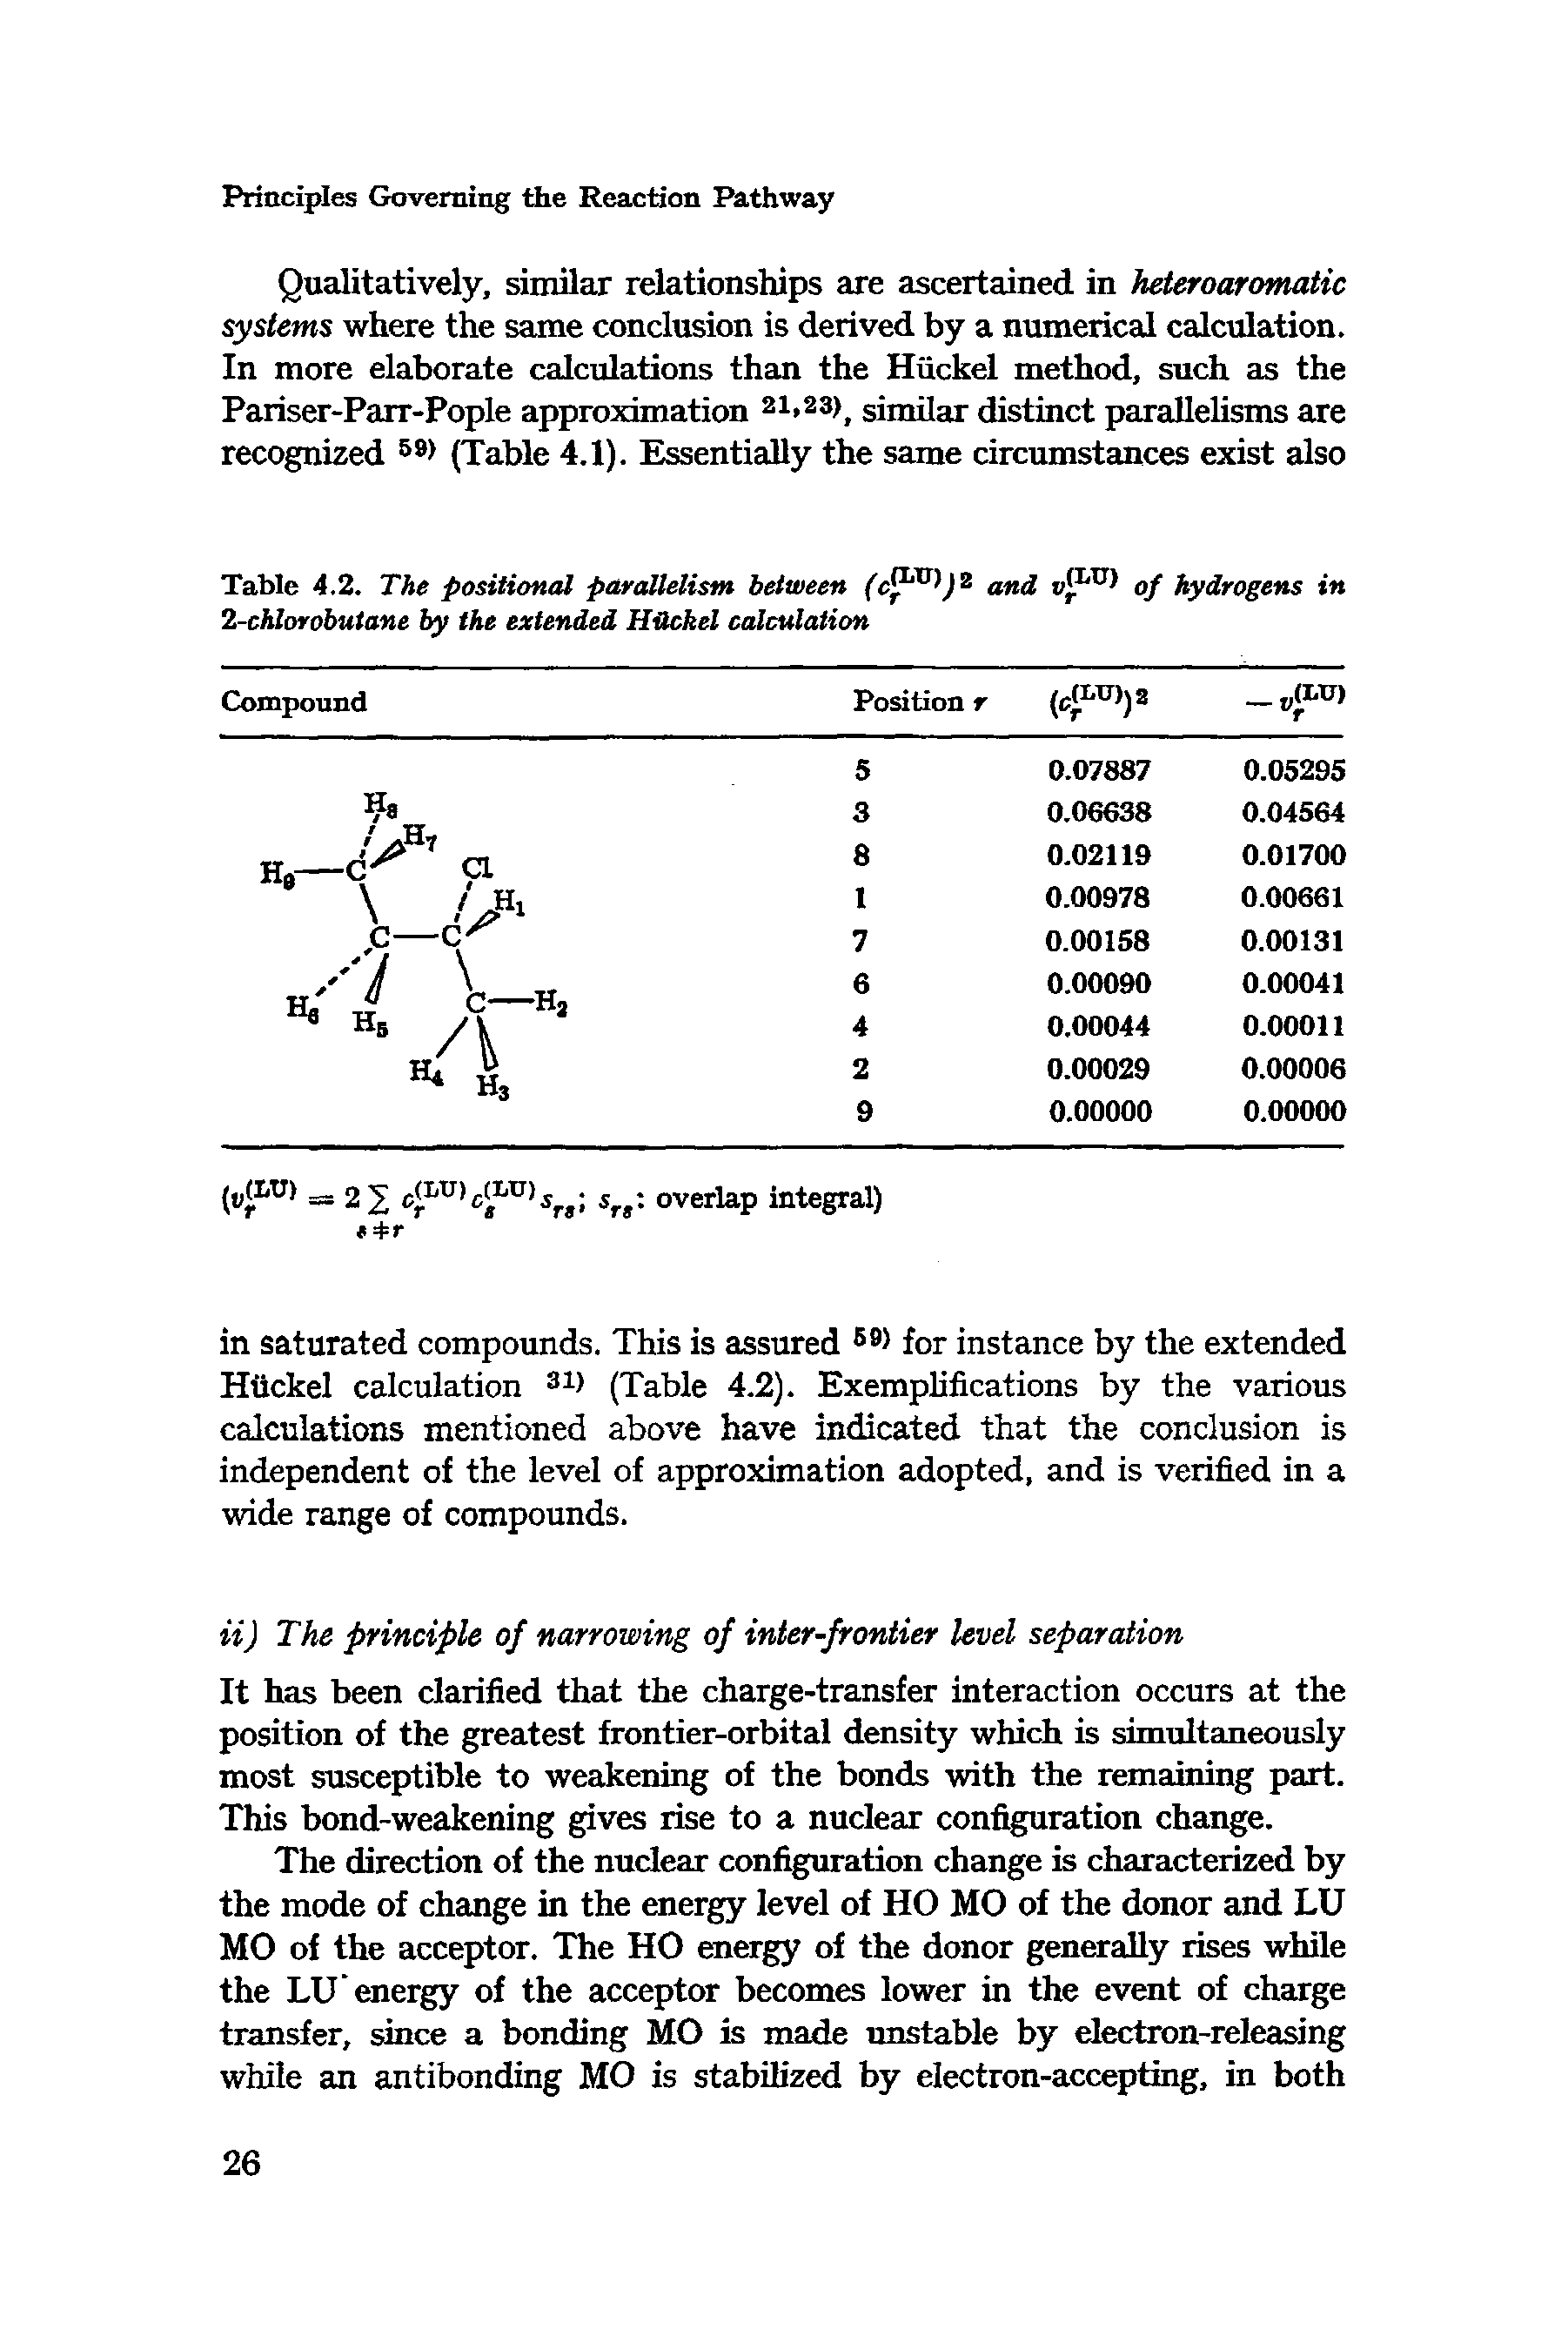 Table 4.2. The positional parallelism between (c ° )2 and of hydrogens in 2-chlorobutane by the extended Hiickel calculation...